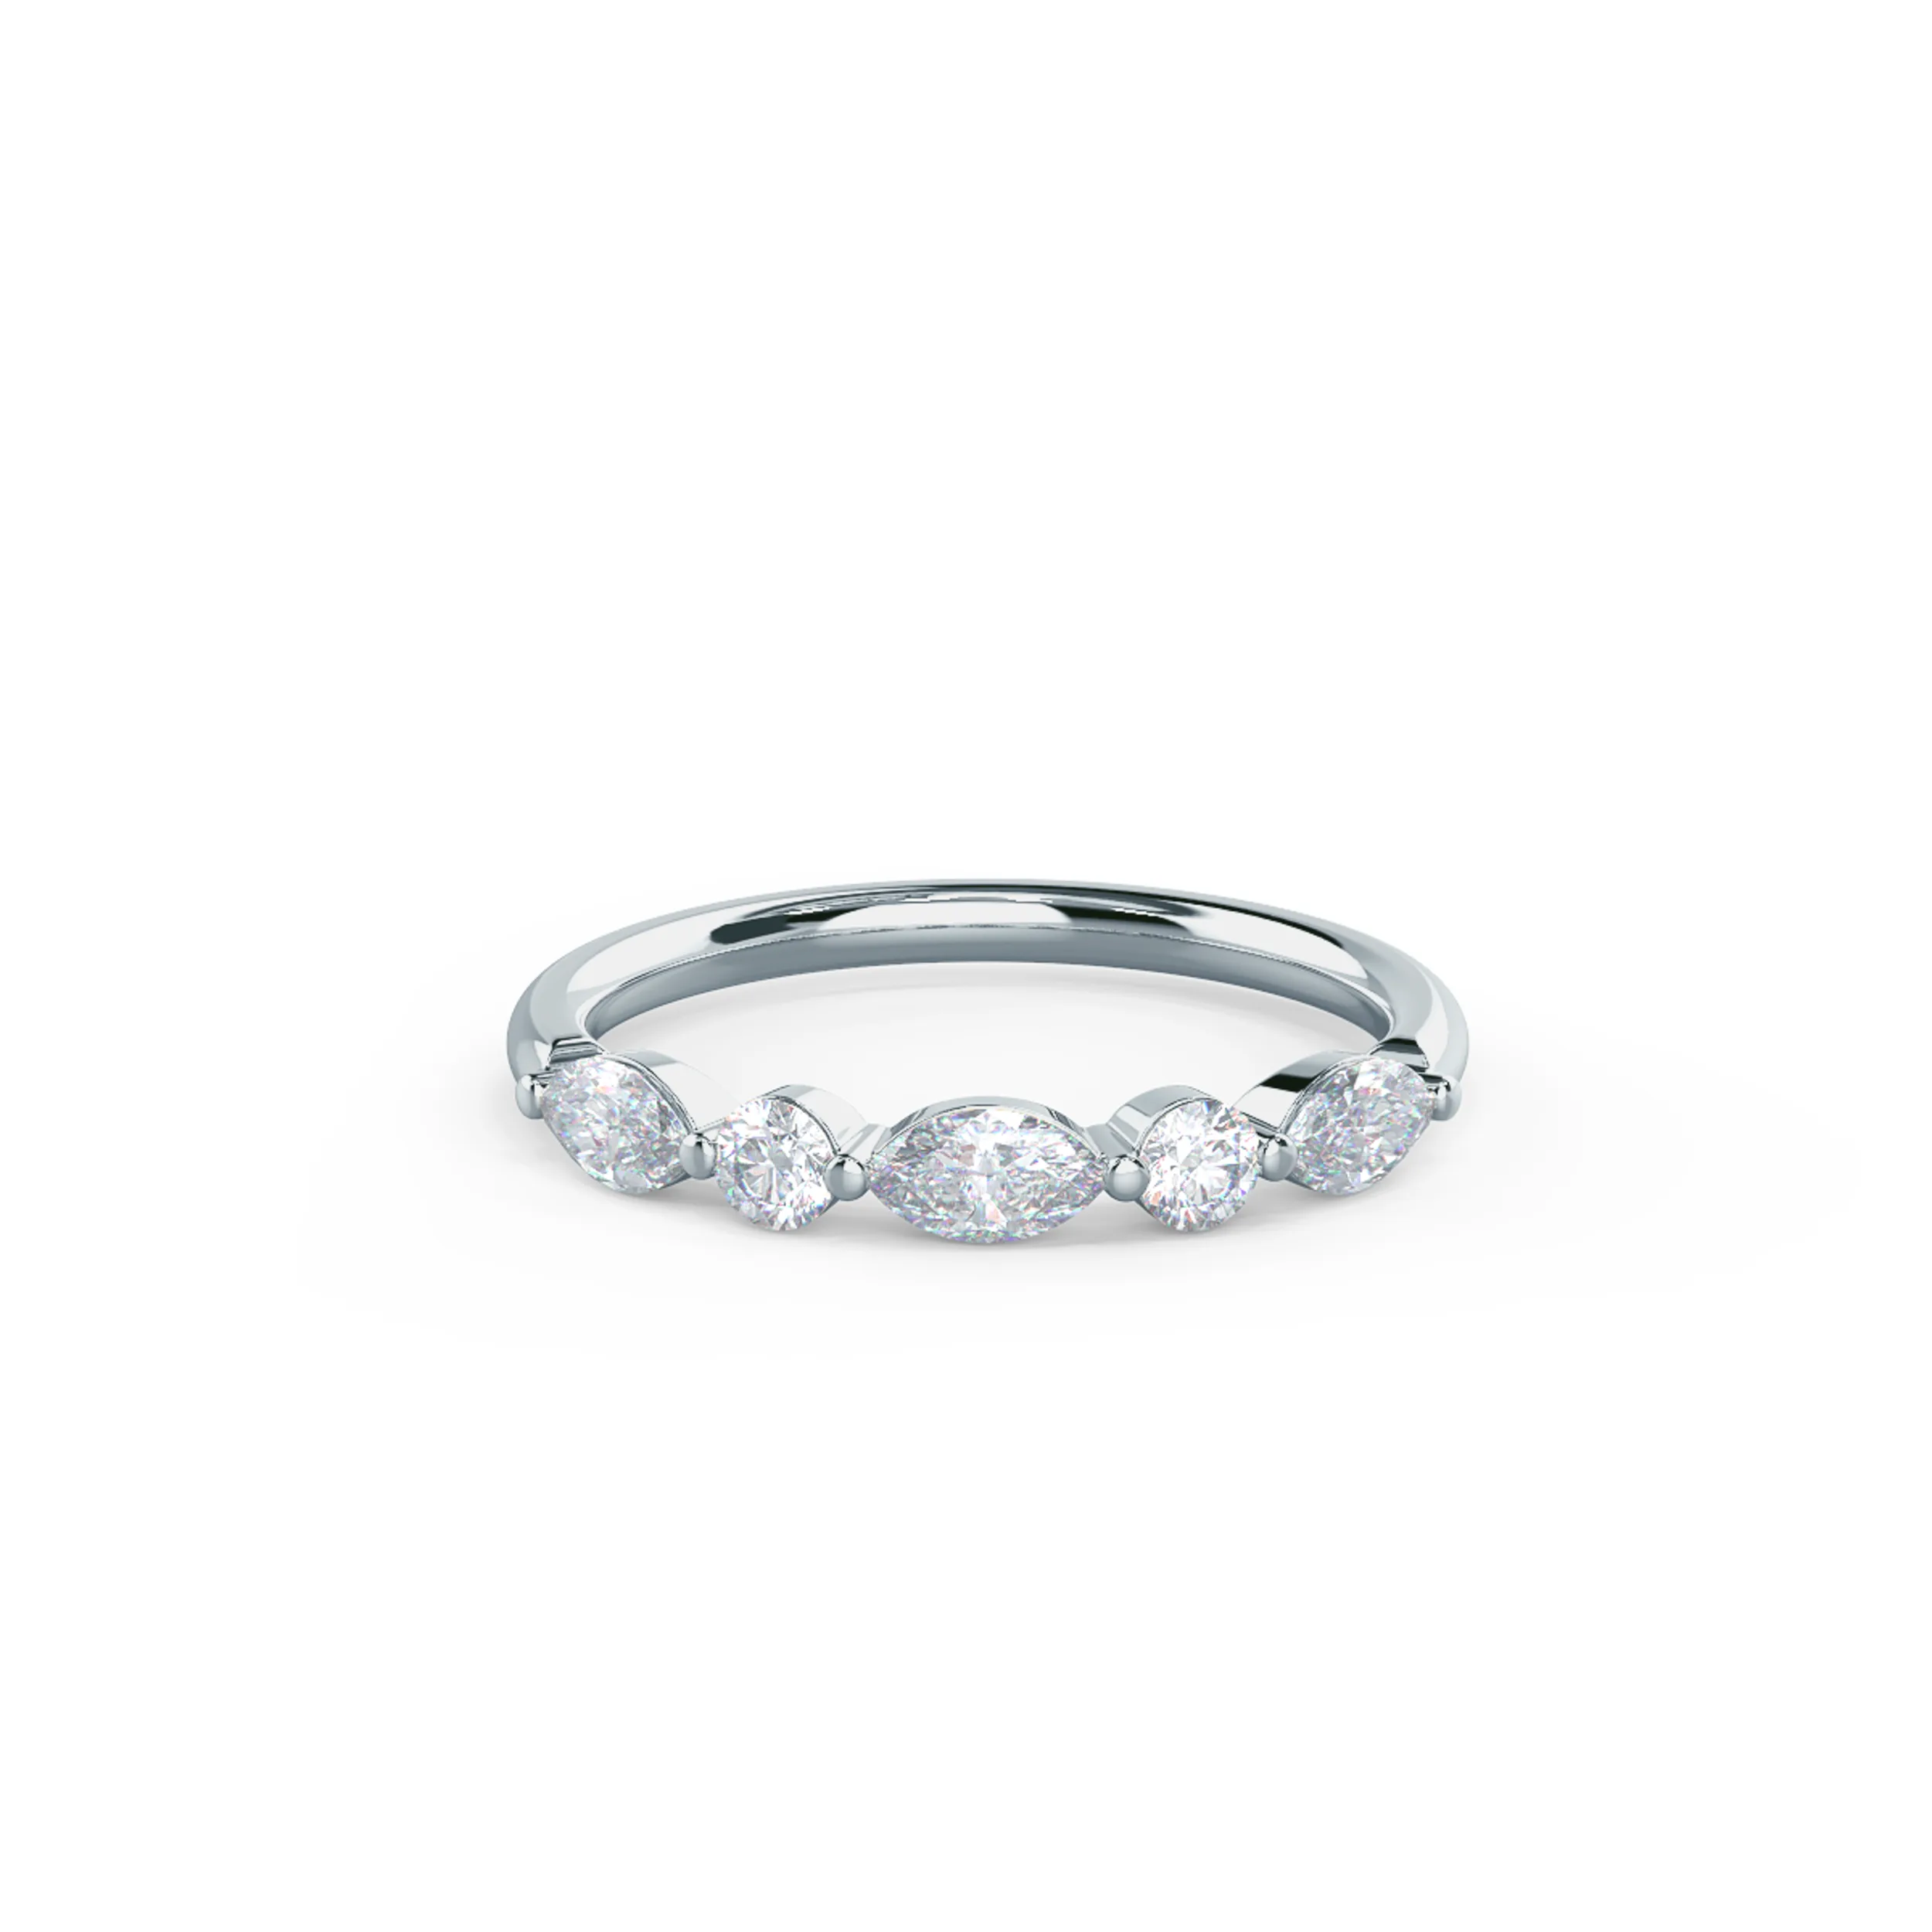 Hand Selected 0.6 Carat Lab Diamonds set in 18k White Gold Marquise and Round East-West Five Stone (Main View)